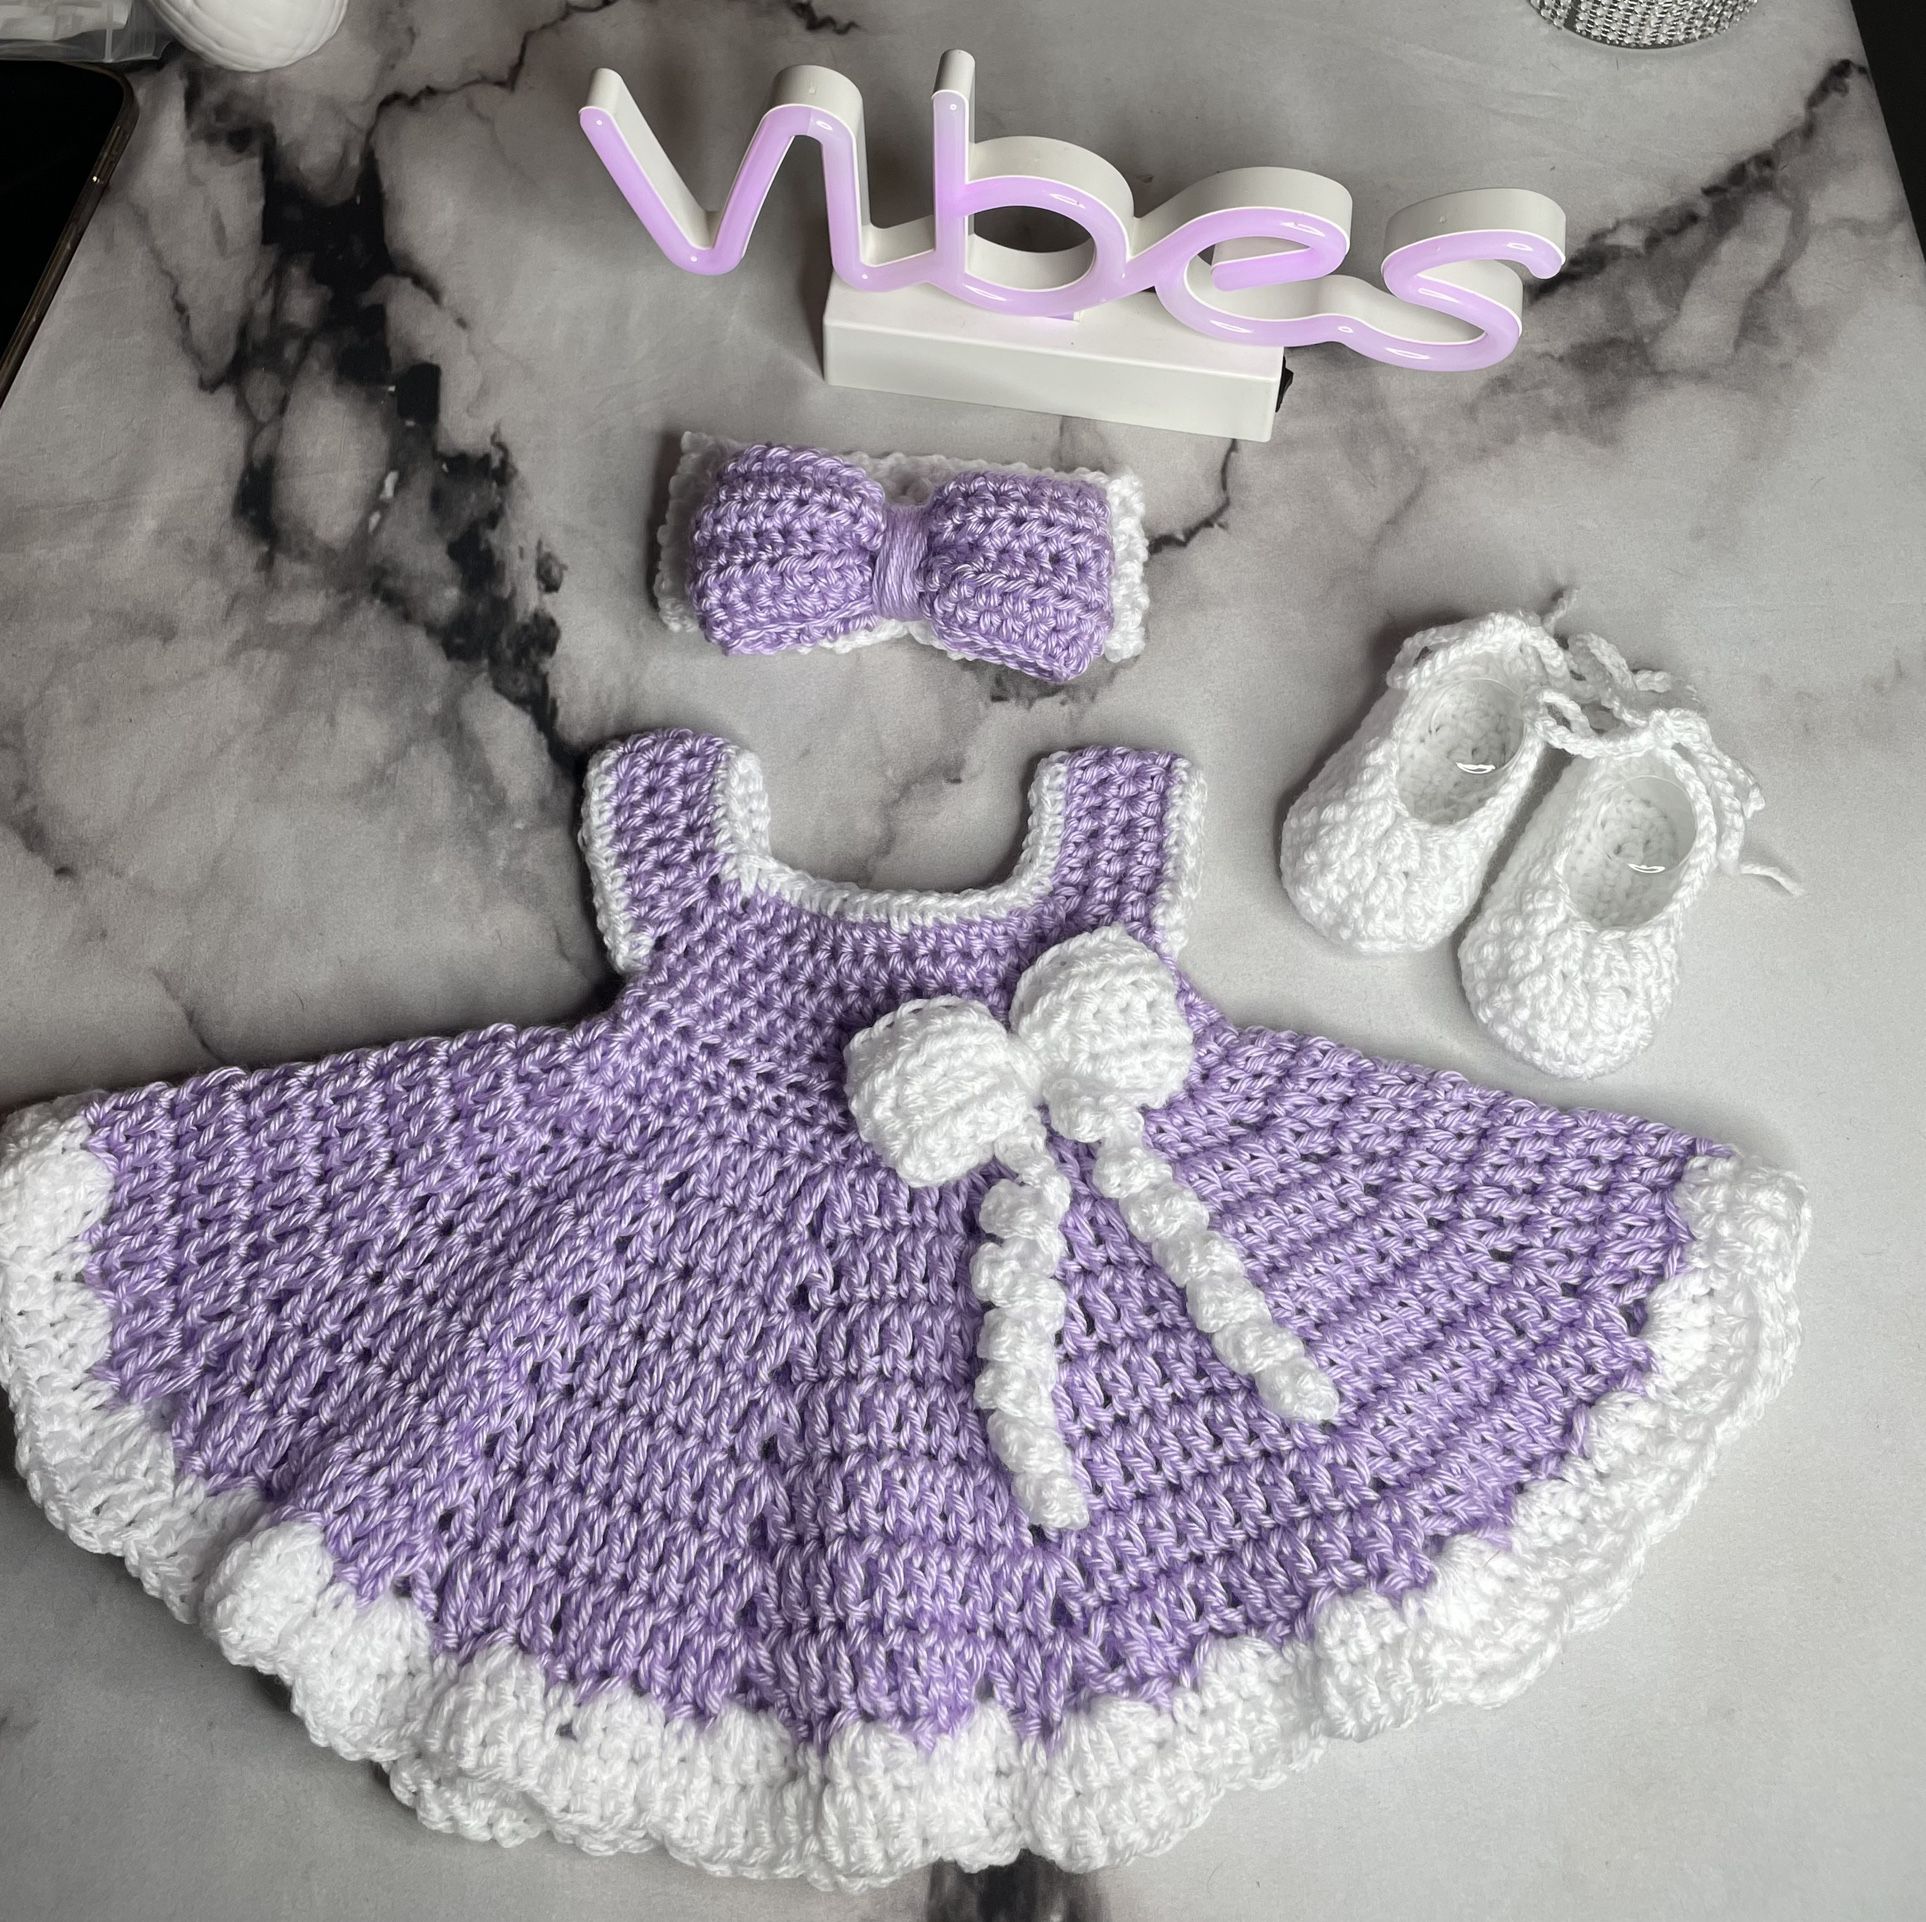 Crochet Handmade Baby Outfit